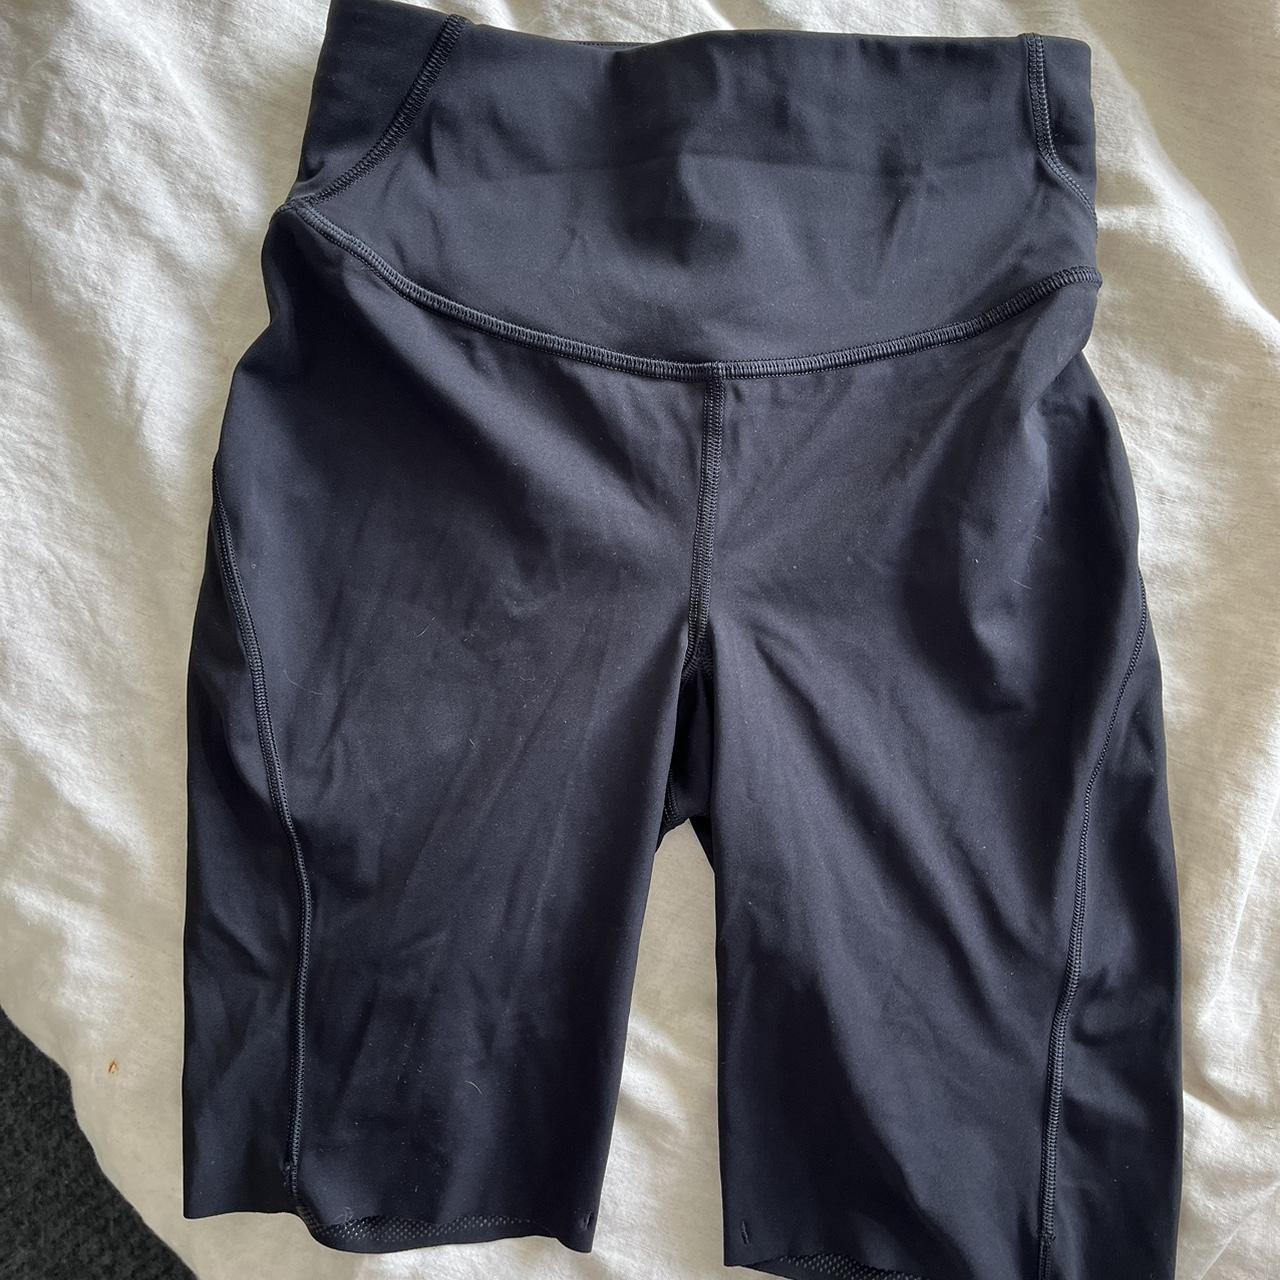 lululemon shorts size 4, worn twice with no signs of - Depop